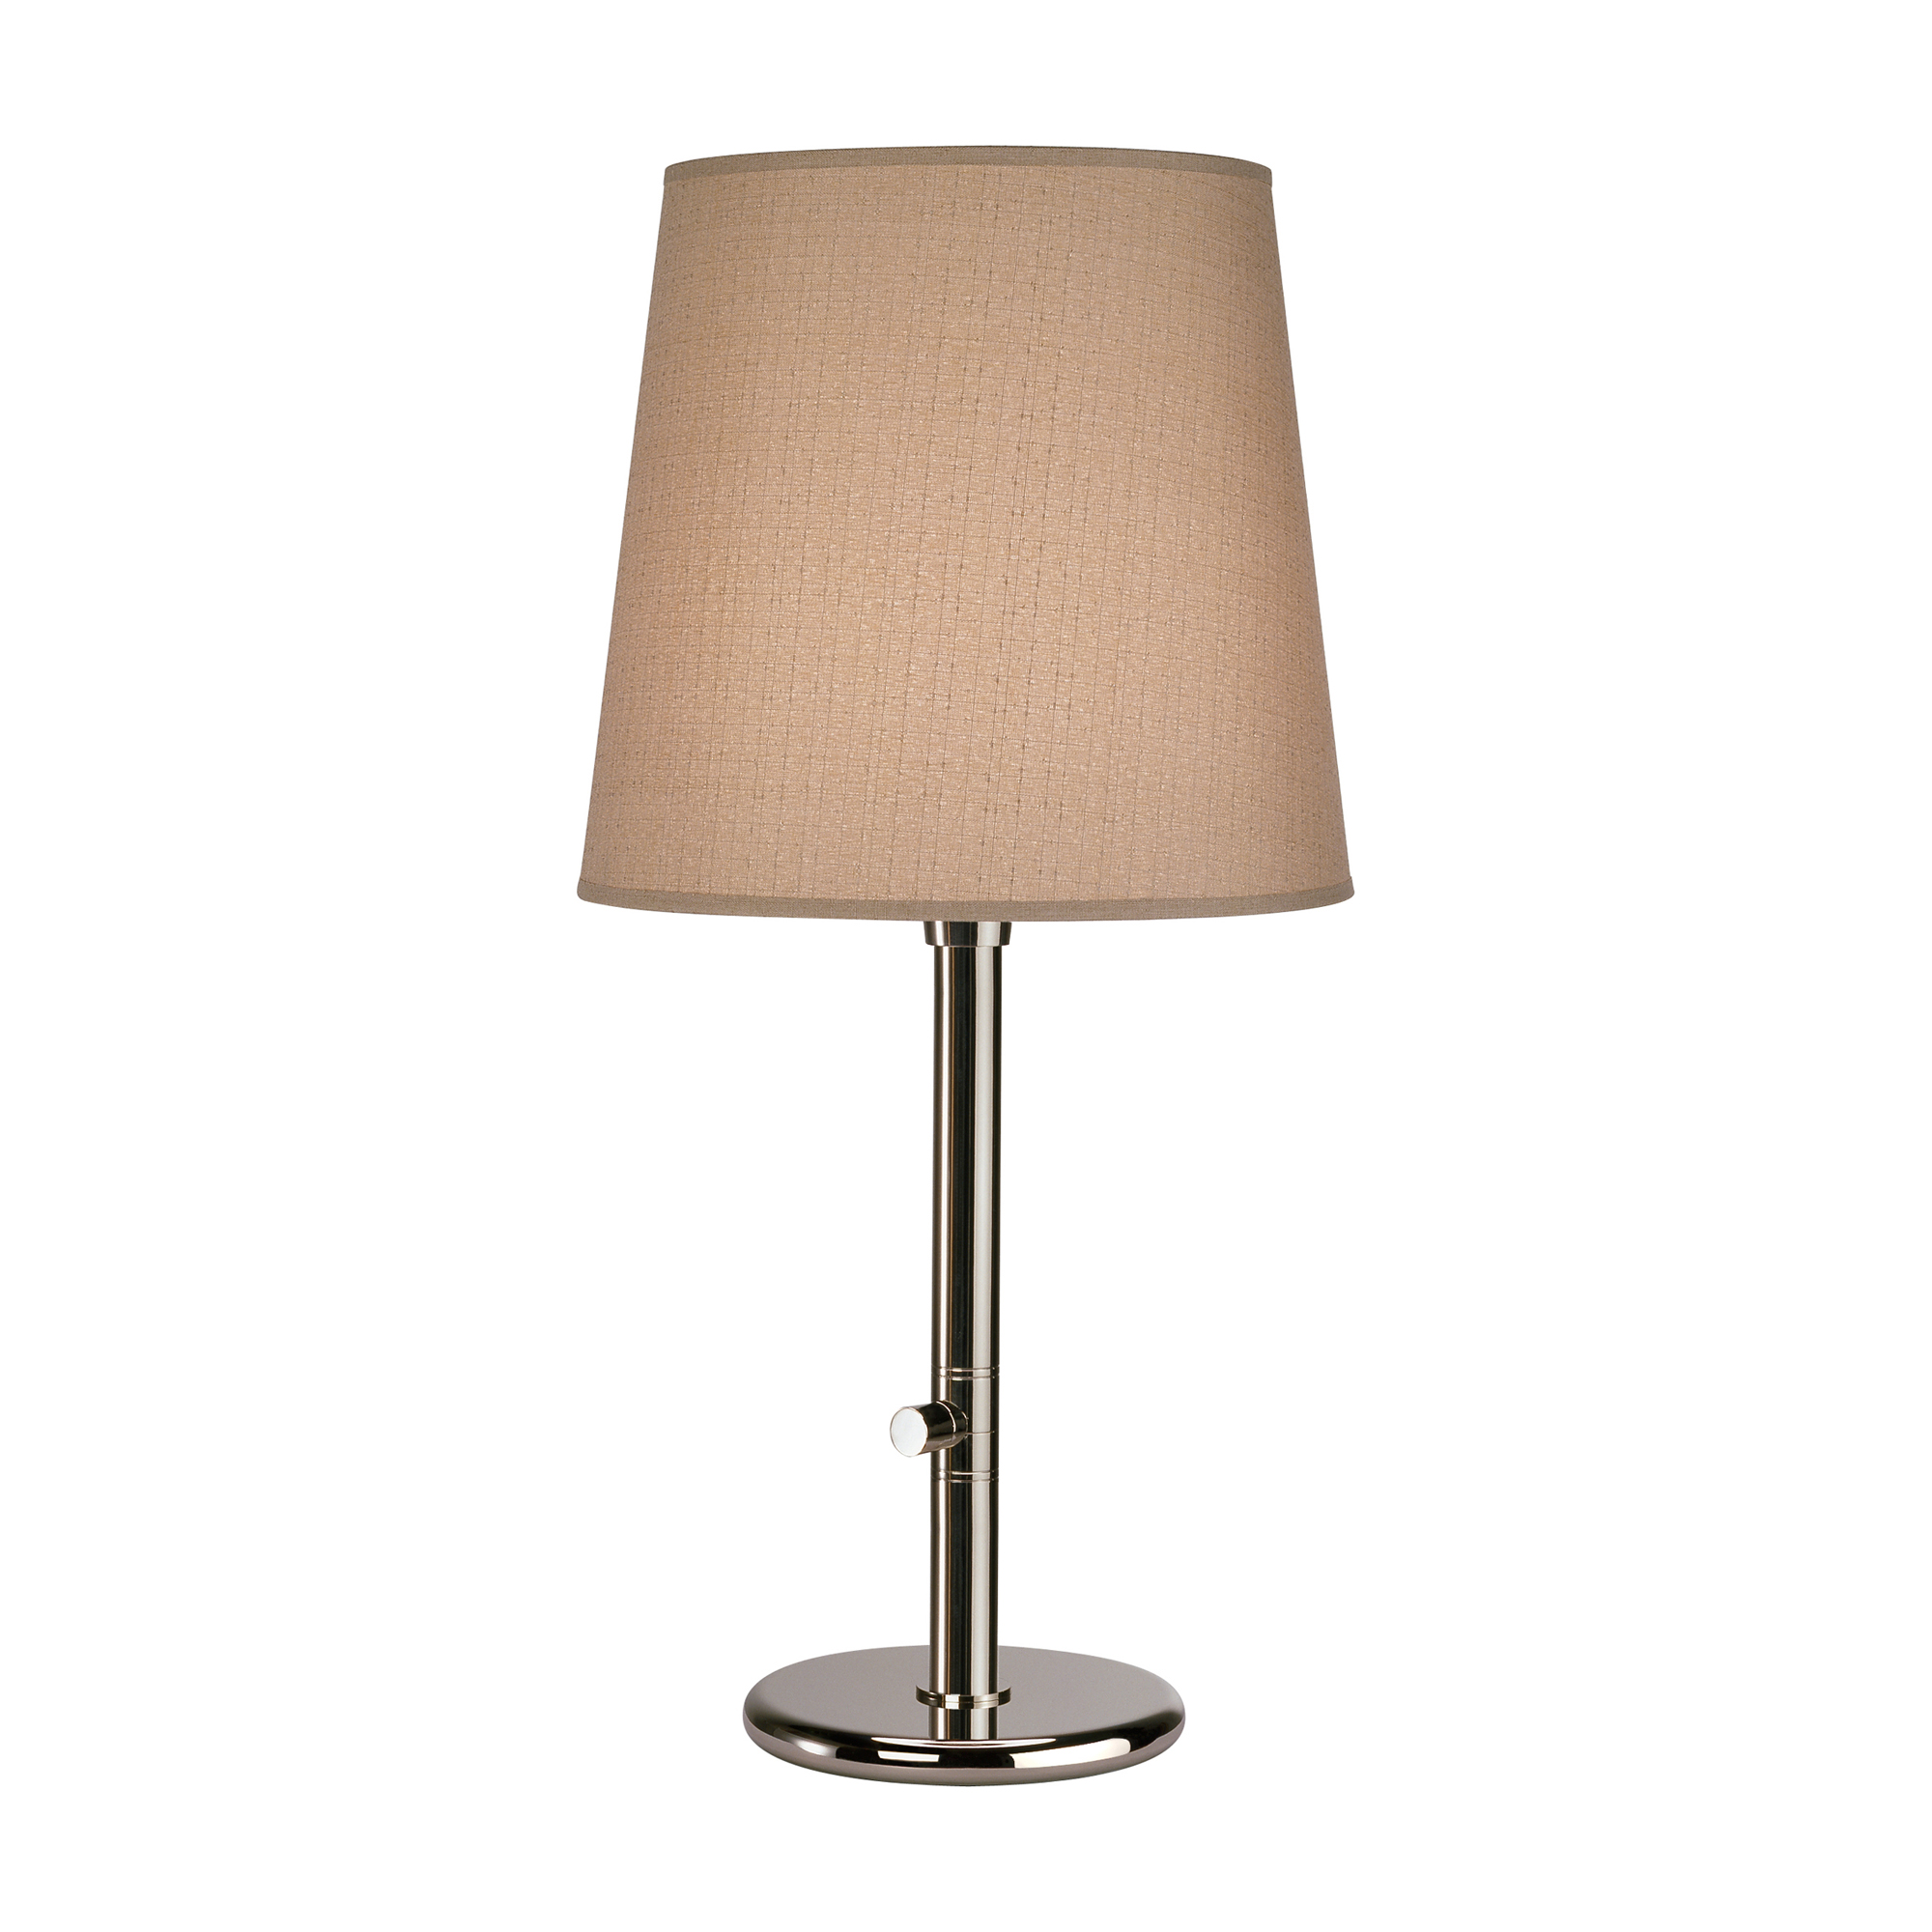 Rico Espinet Buster Chica Accent Lamp